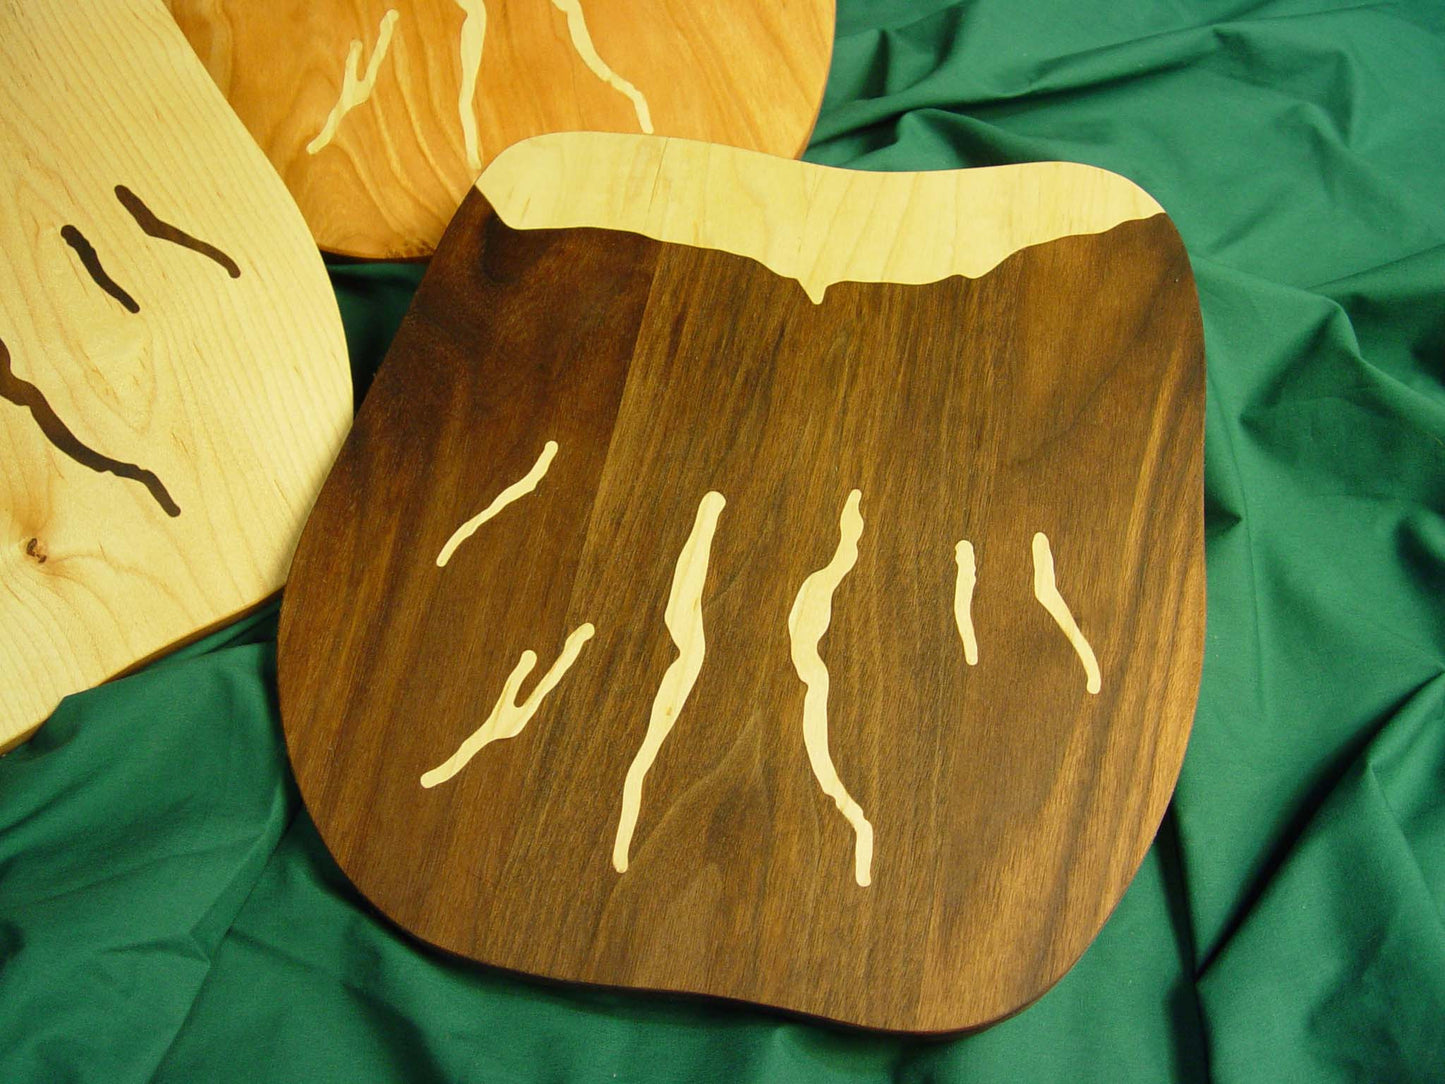 Fingerlakes Cutting and Serving Board